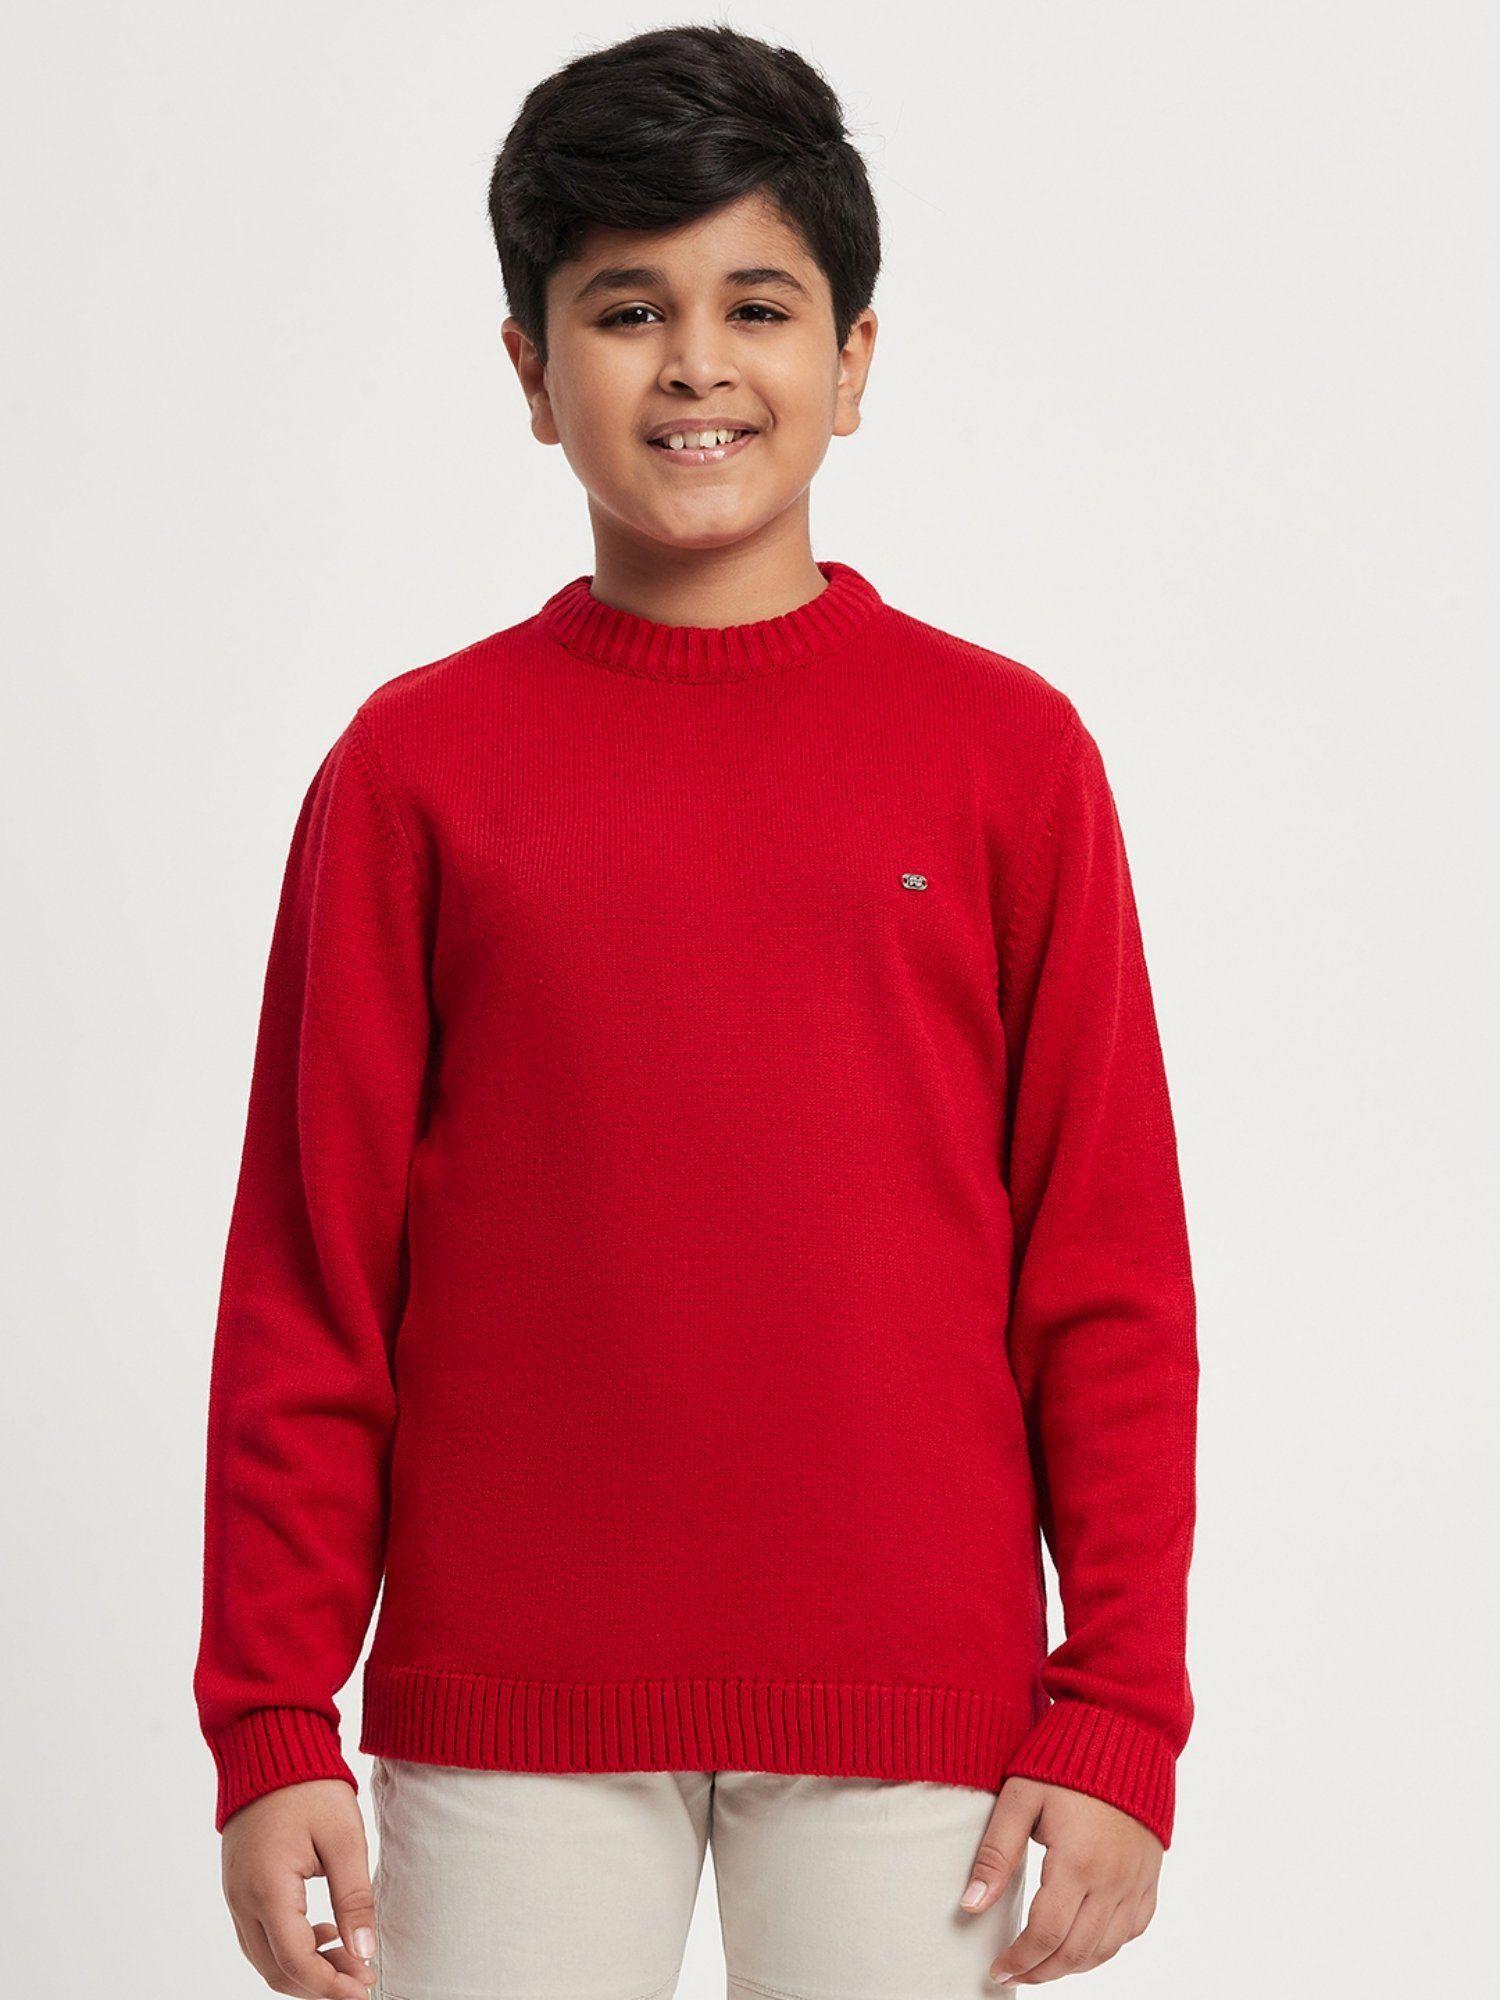 unisex red woven full sleeves round neck sweater